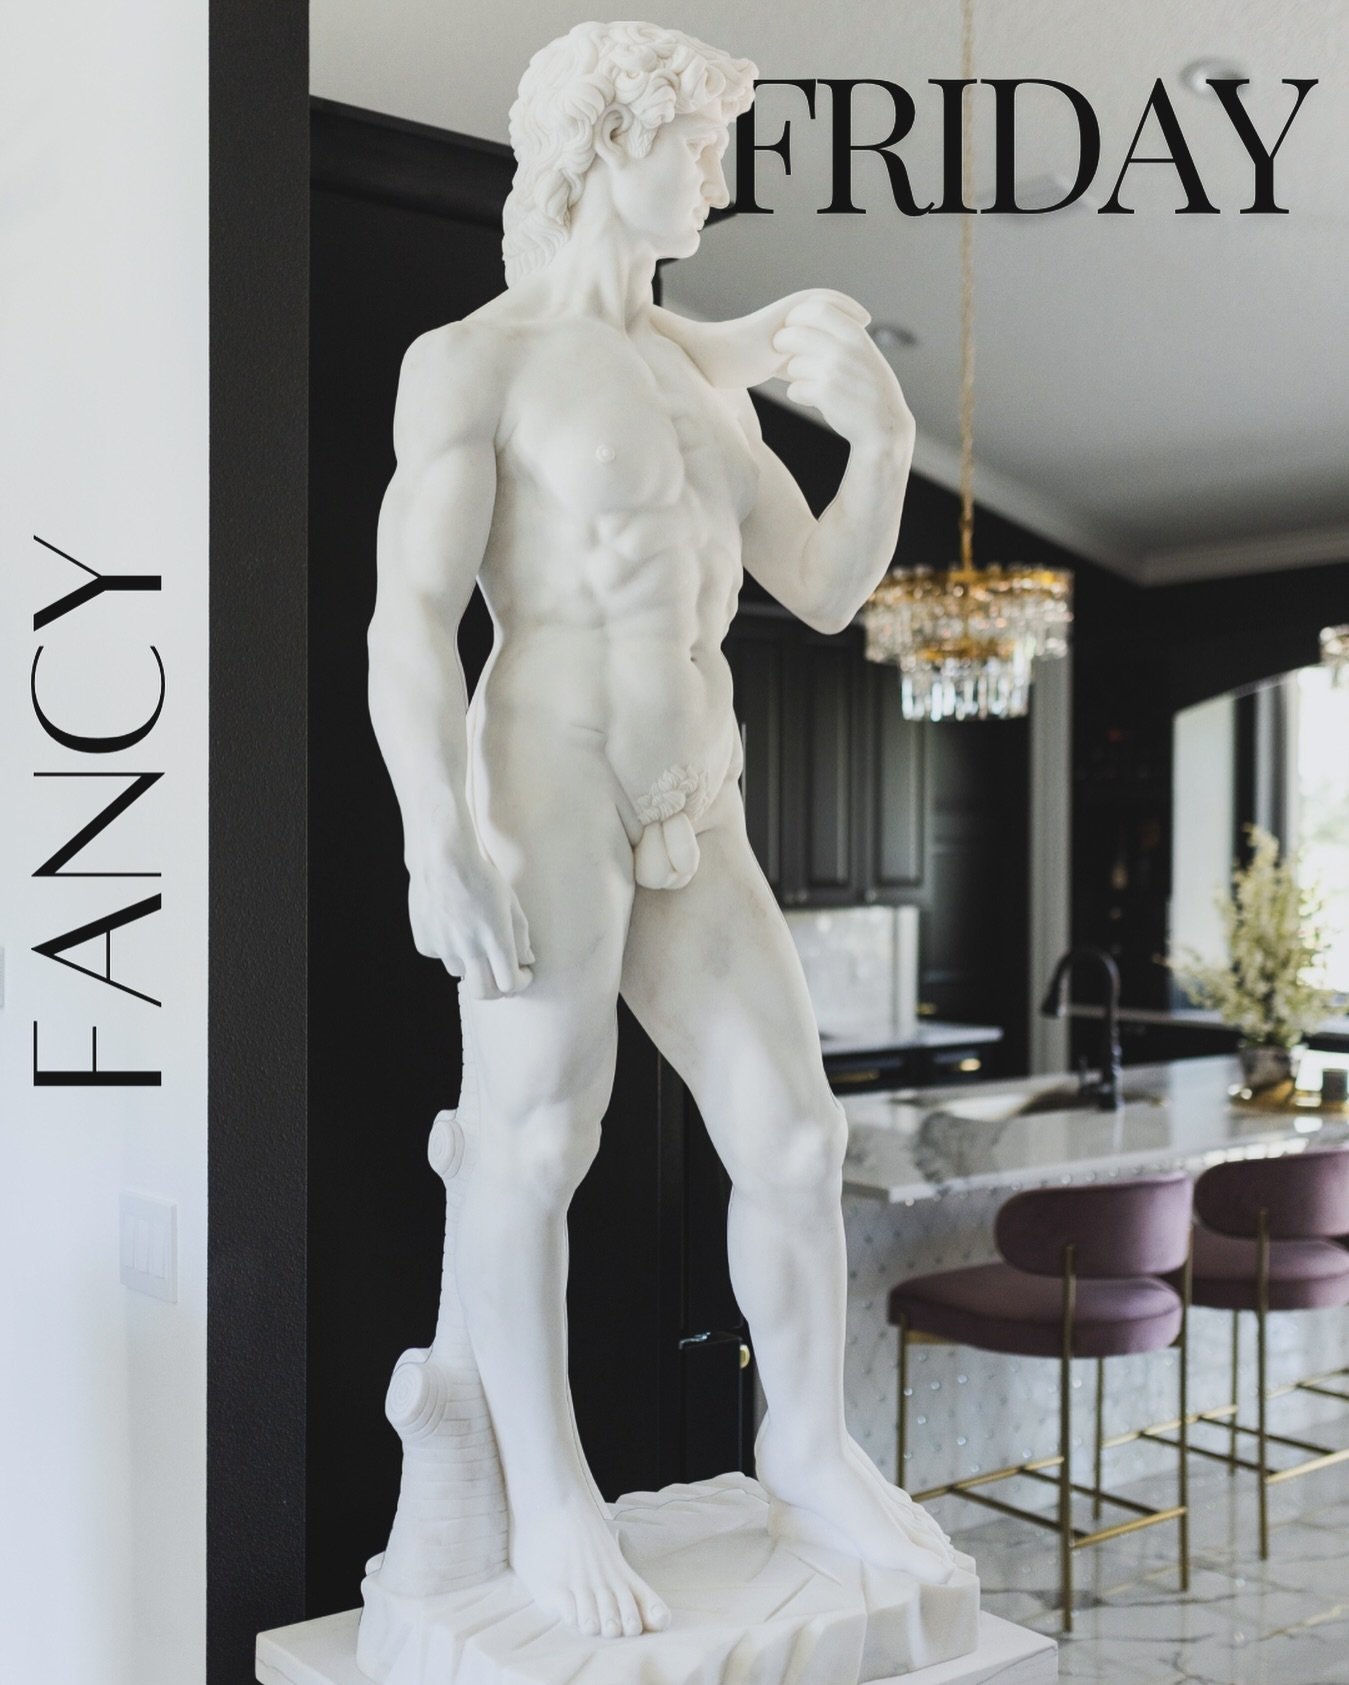 Helllllllo and welcome to our official unofficial petition to make &ldquo;Fancy Friday&rdquo; a thing that we fully indulge in. I mean, what&rsquo;s fancier than a replica of the statue of David in your kitchen??? HERE 👏🏻FOR 👏🏻 IT 👏🏻

Let this 